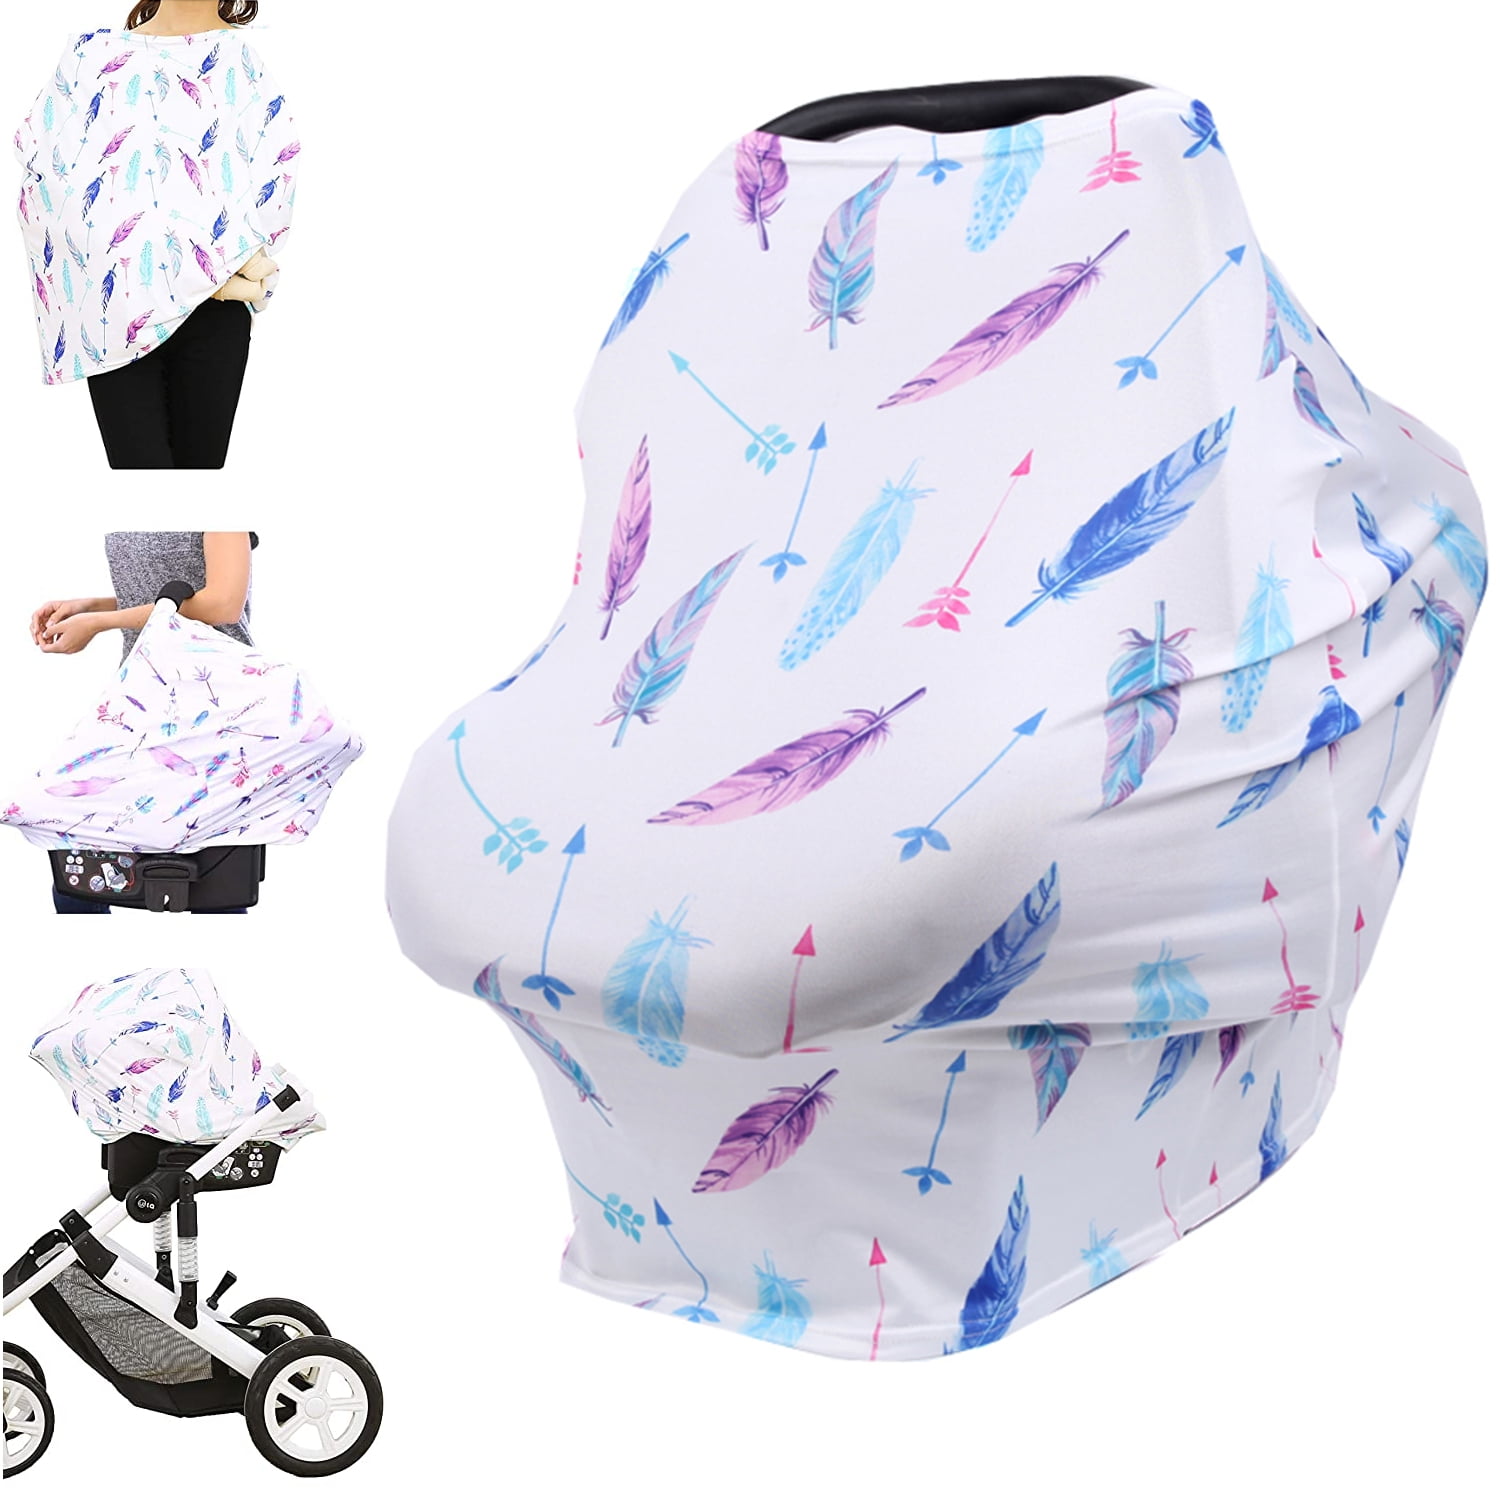 White Floral Minky Sunshade Covers 3 in 1 Baby Carseat Canopy Nursing Cover Up Apron with Peekaboo